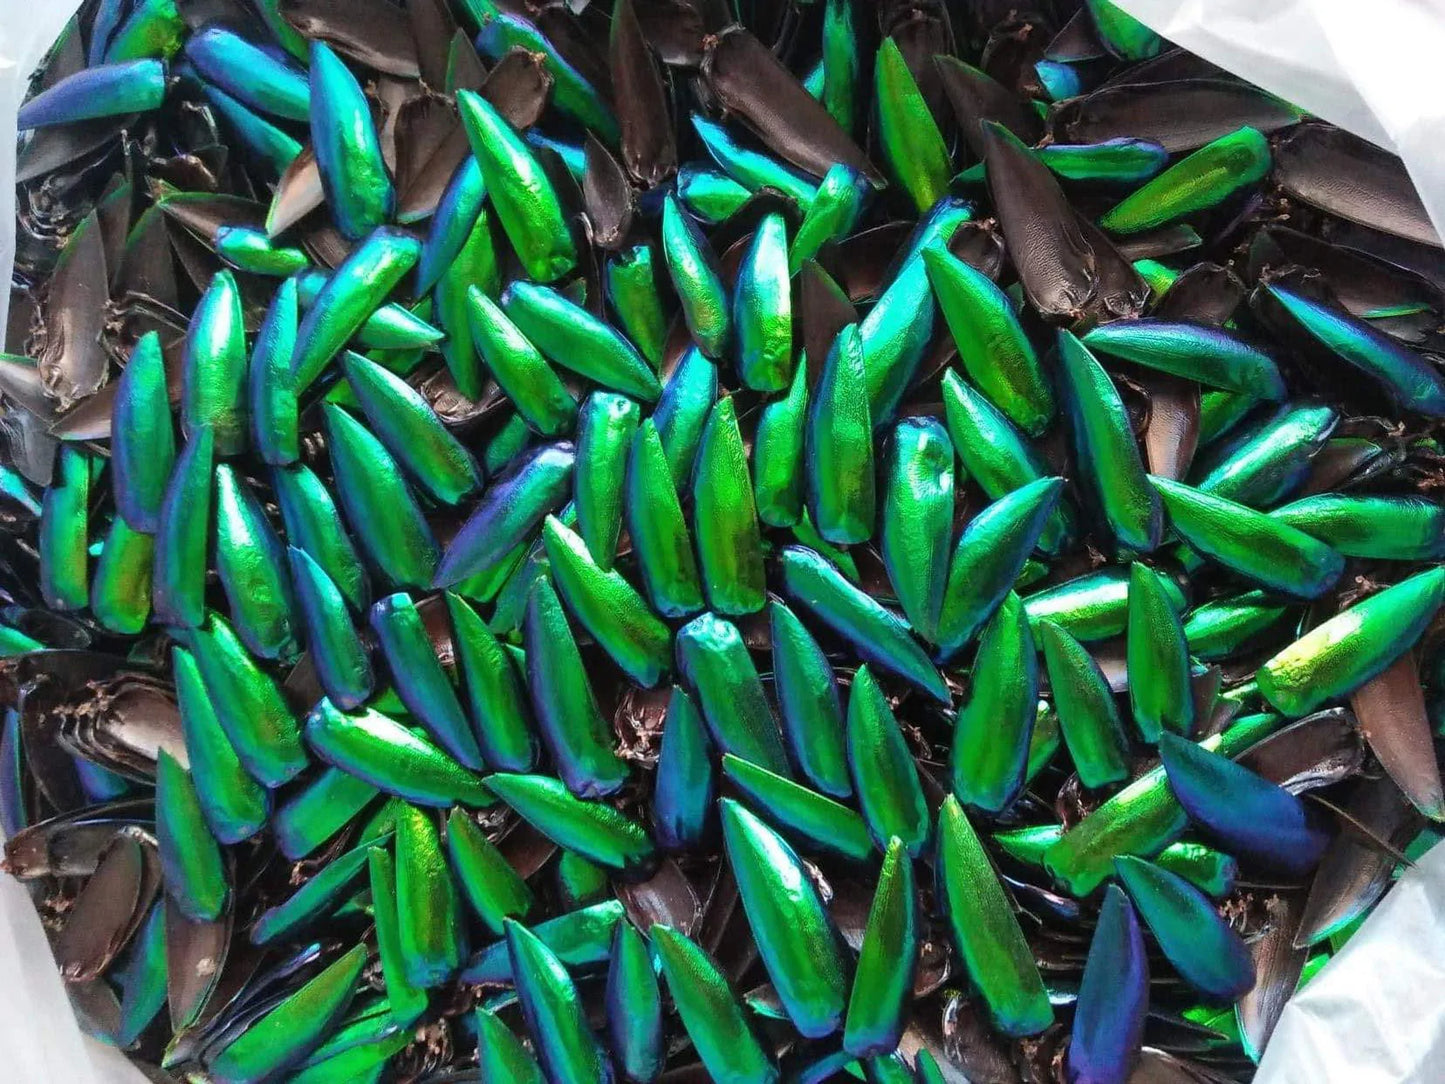 Jewel Beetle Wings UNDRILLED NO-HOLE Taxidermy Beads (200 Wings)